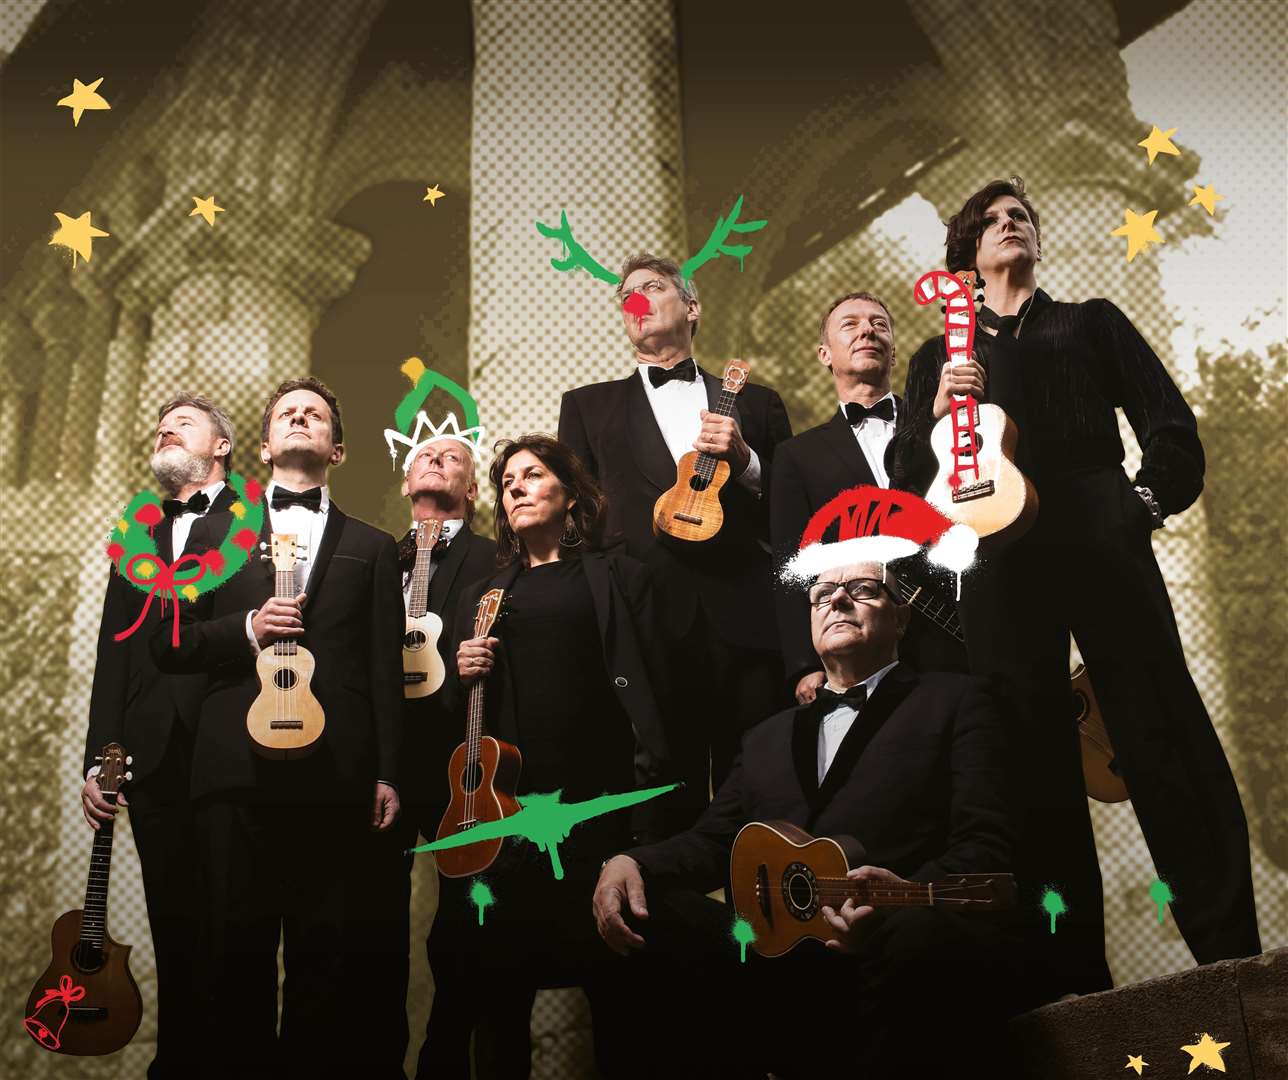 Ukulele Orchestra of Great Britain will be in Tunbridge Wells and Dartford